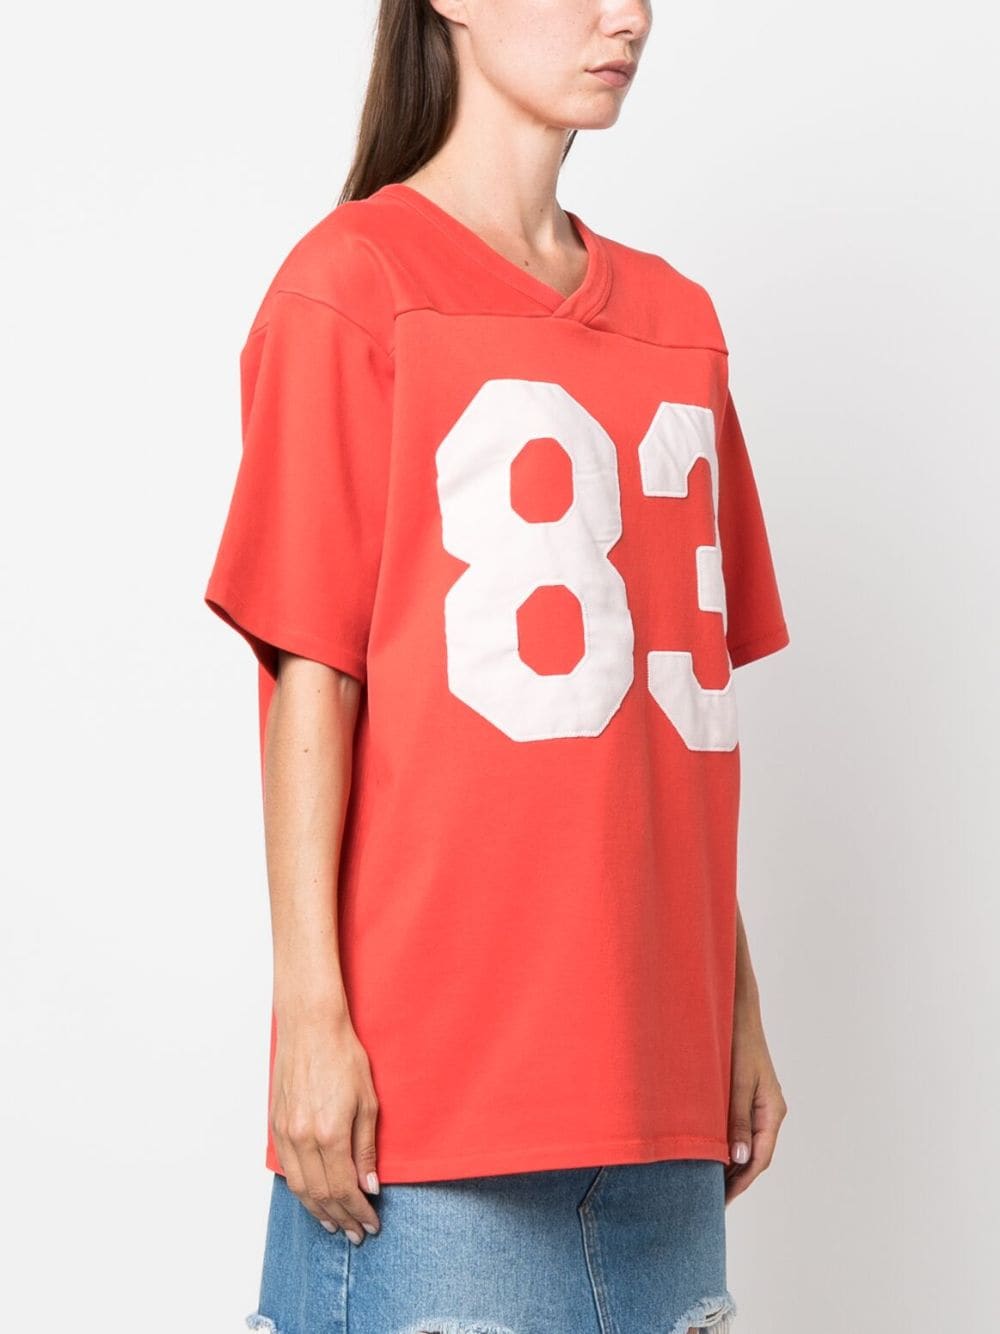 Erl Unisex Football Shirt Knit In Red | ModeSens